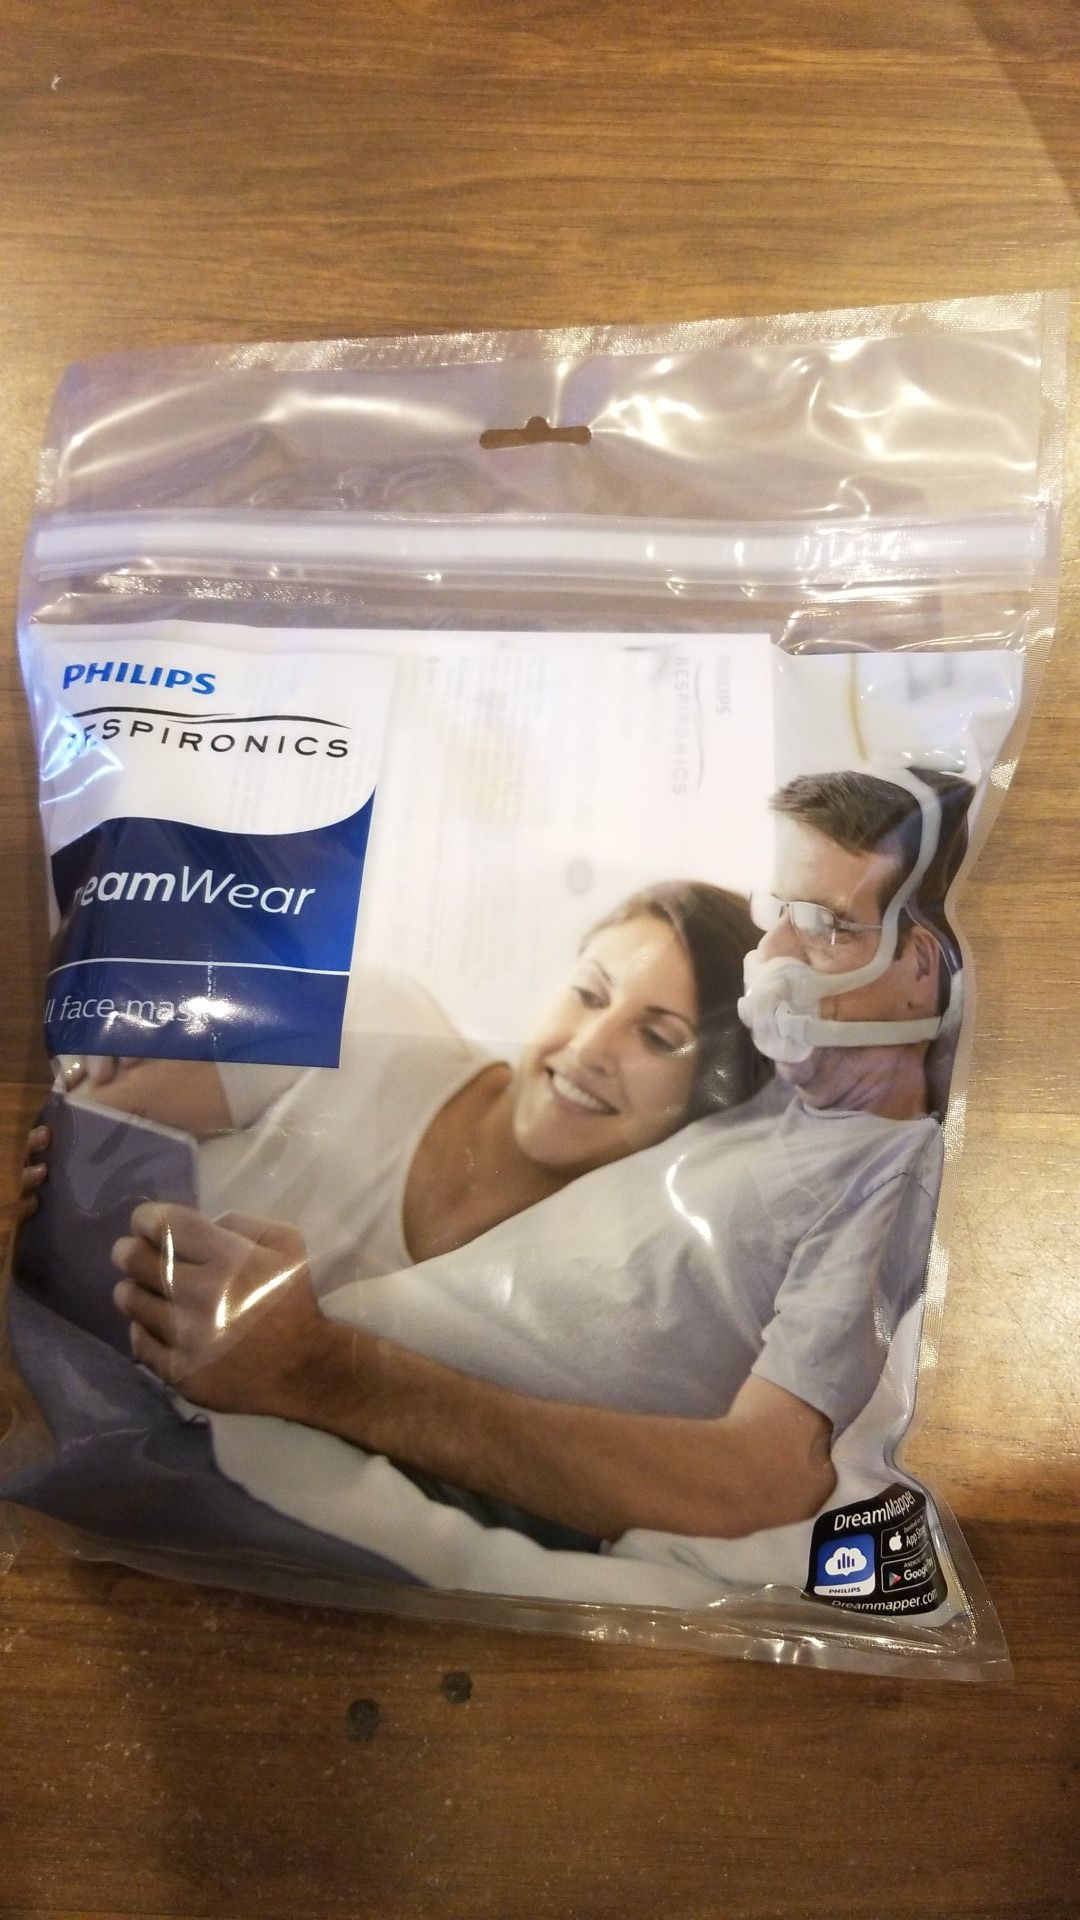 Phillips Respironics Dreamwear full face fitpack cpap mask with headgear